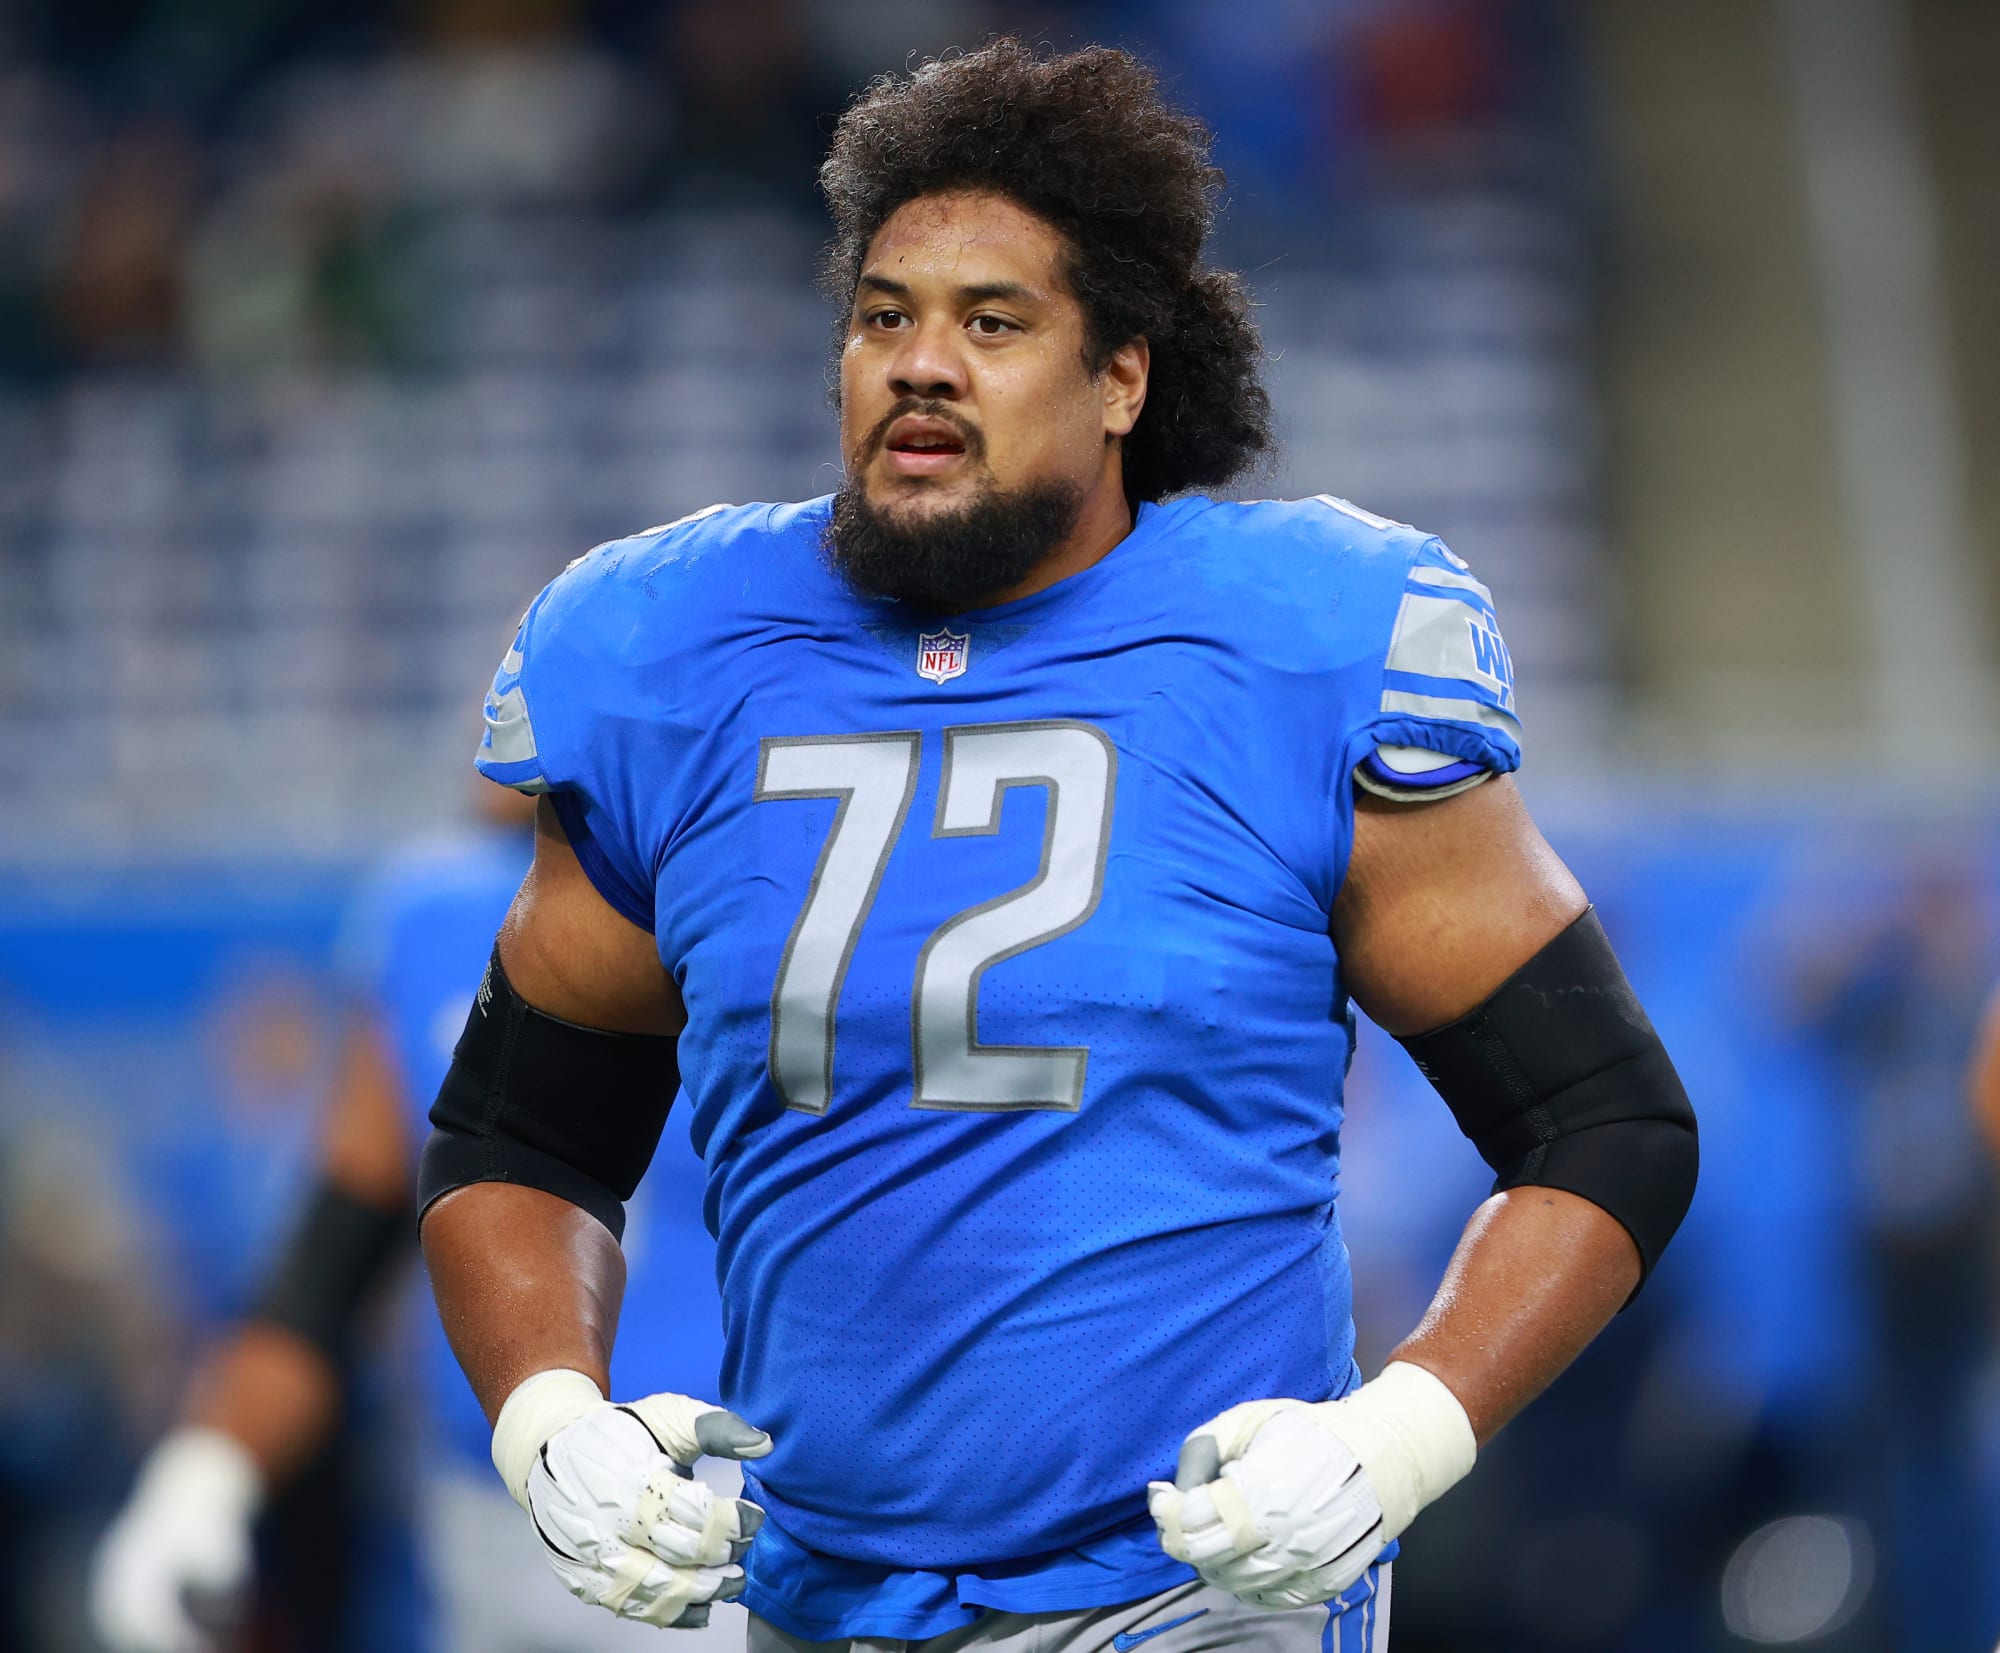 Lions guard Halapoulivaati Vaitai had back surgery, not ruled out for the season